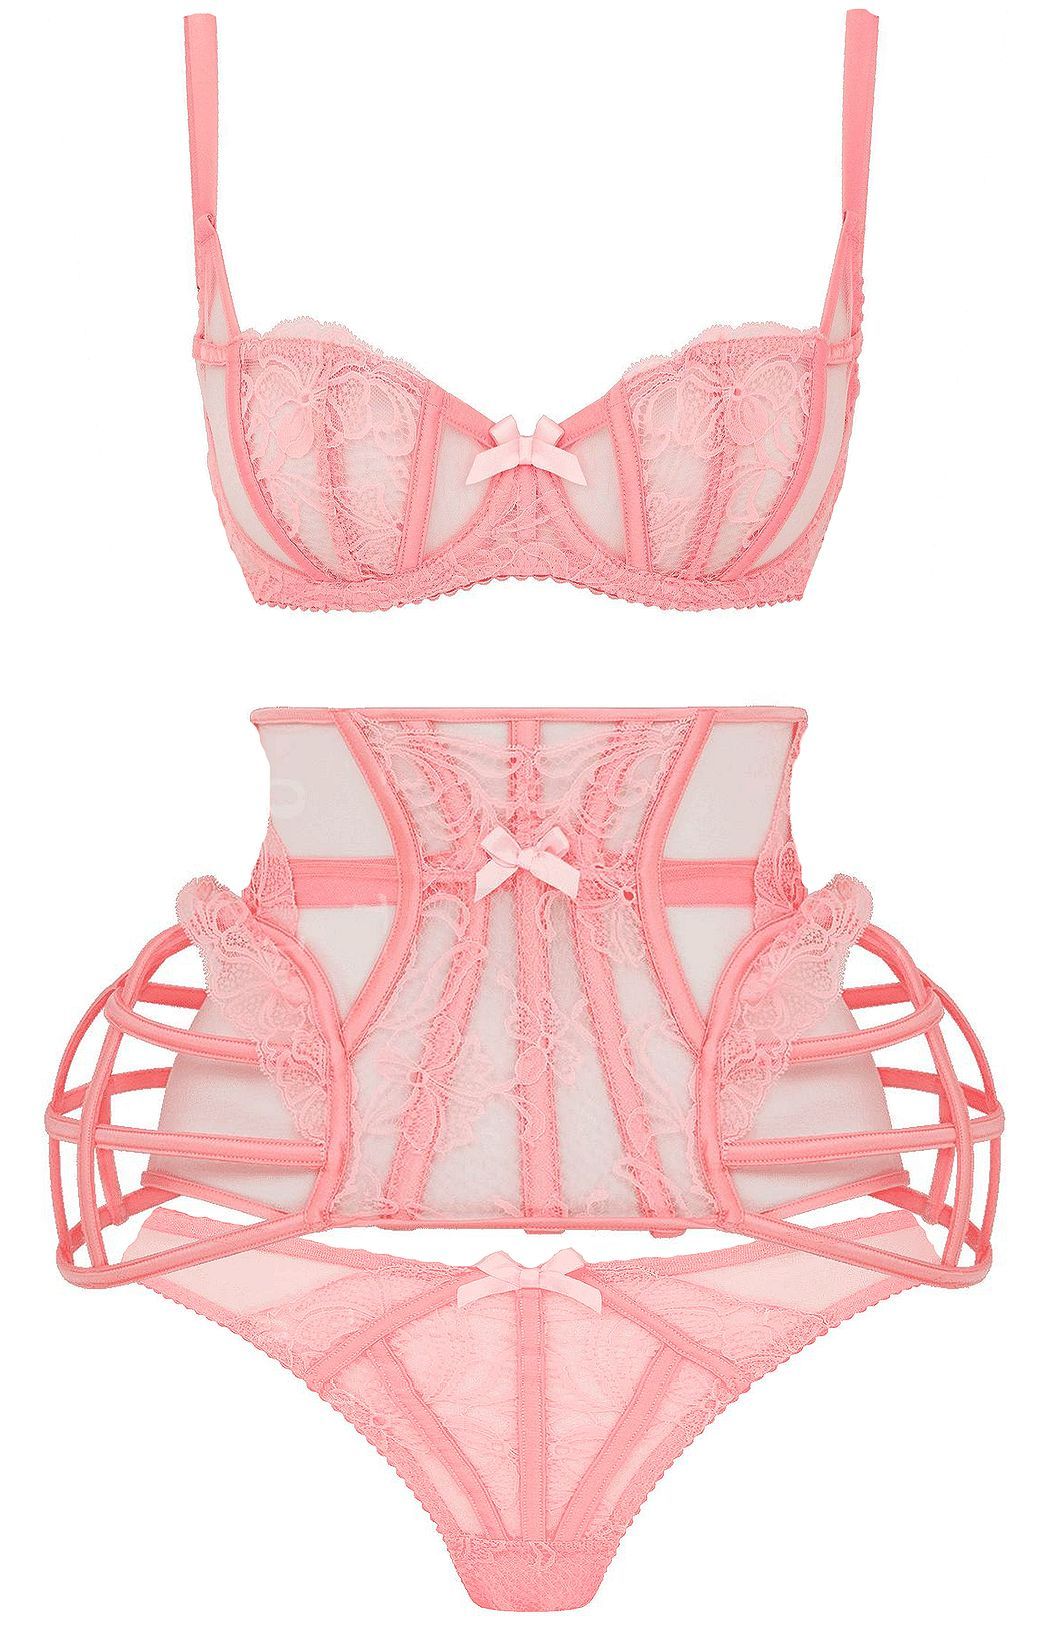 Agent Provocateur on Tumblr